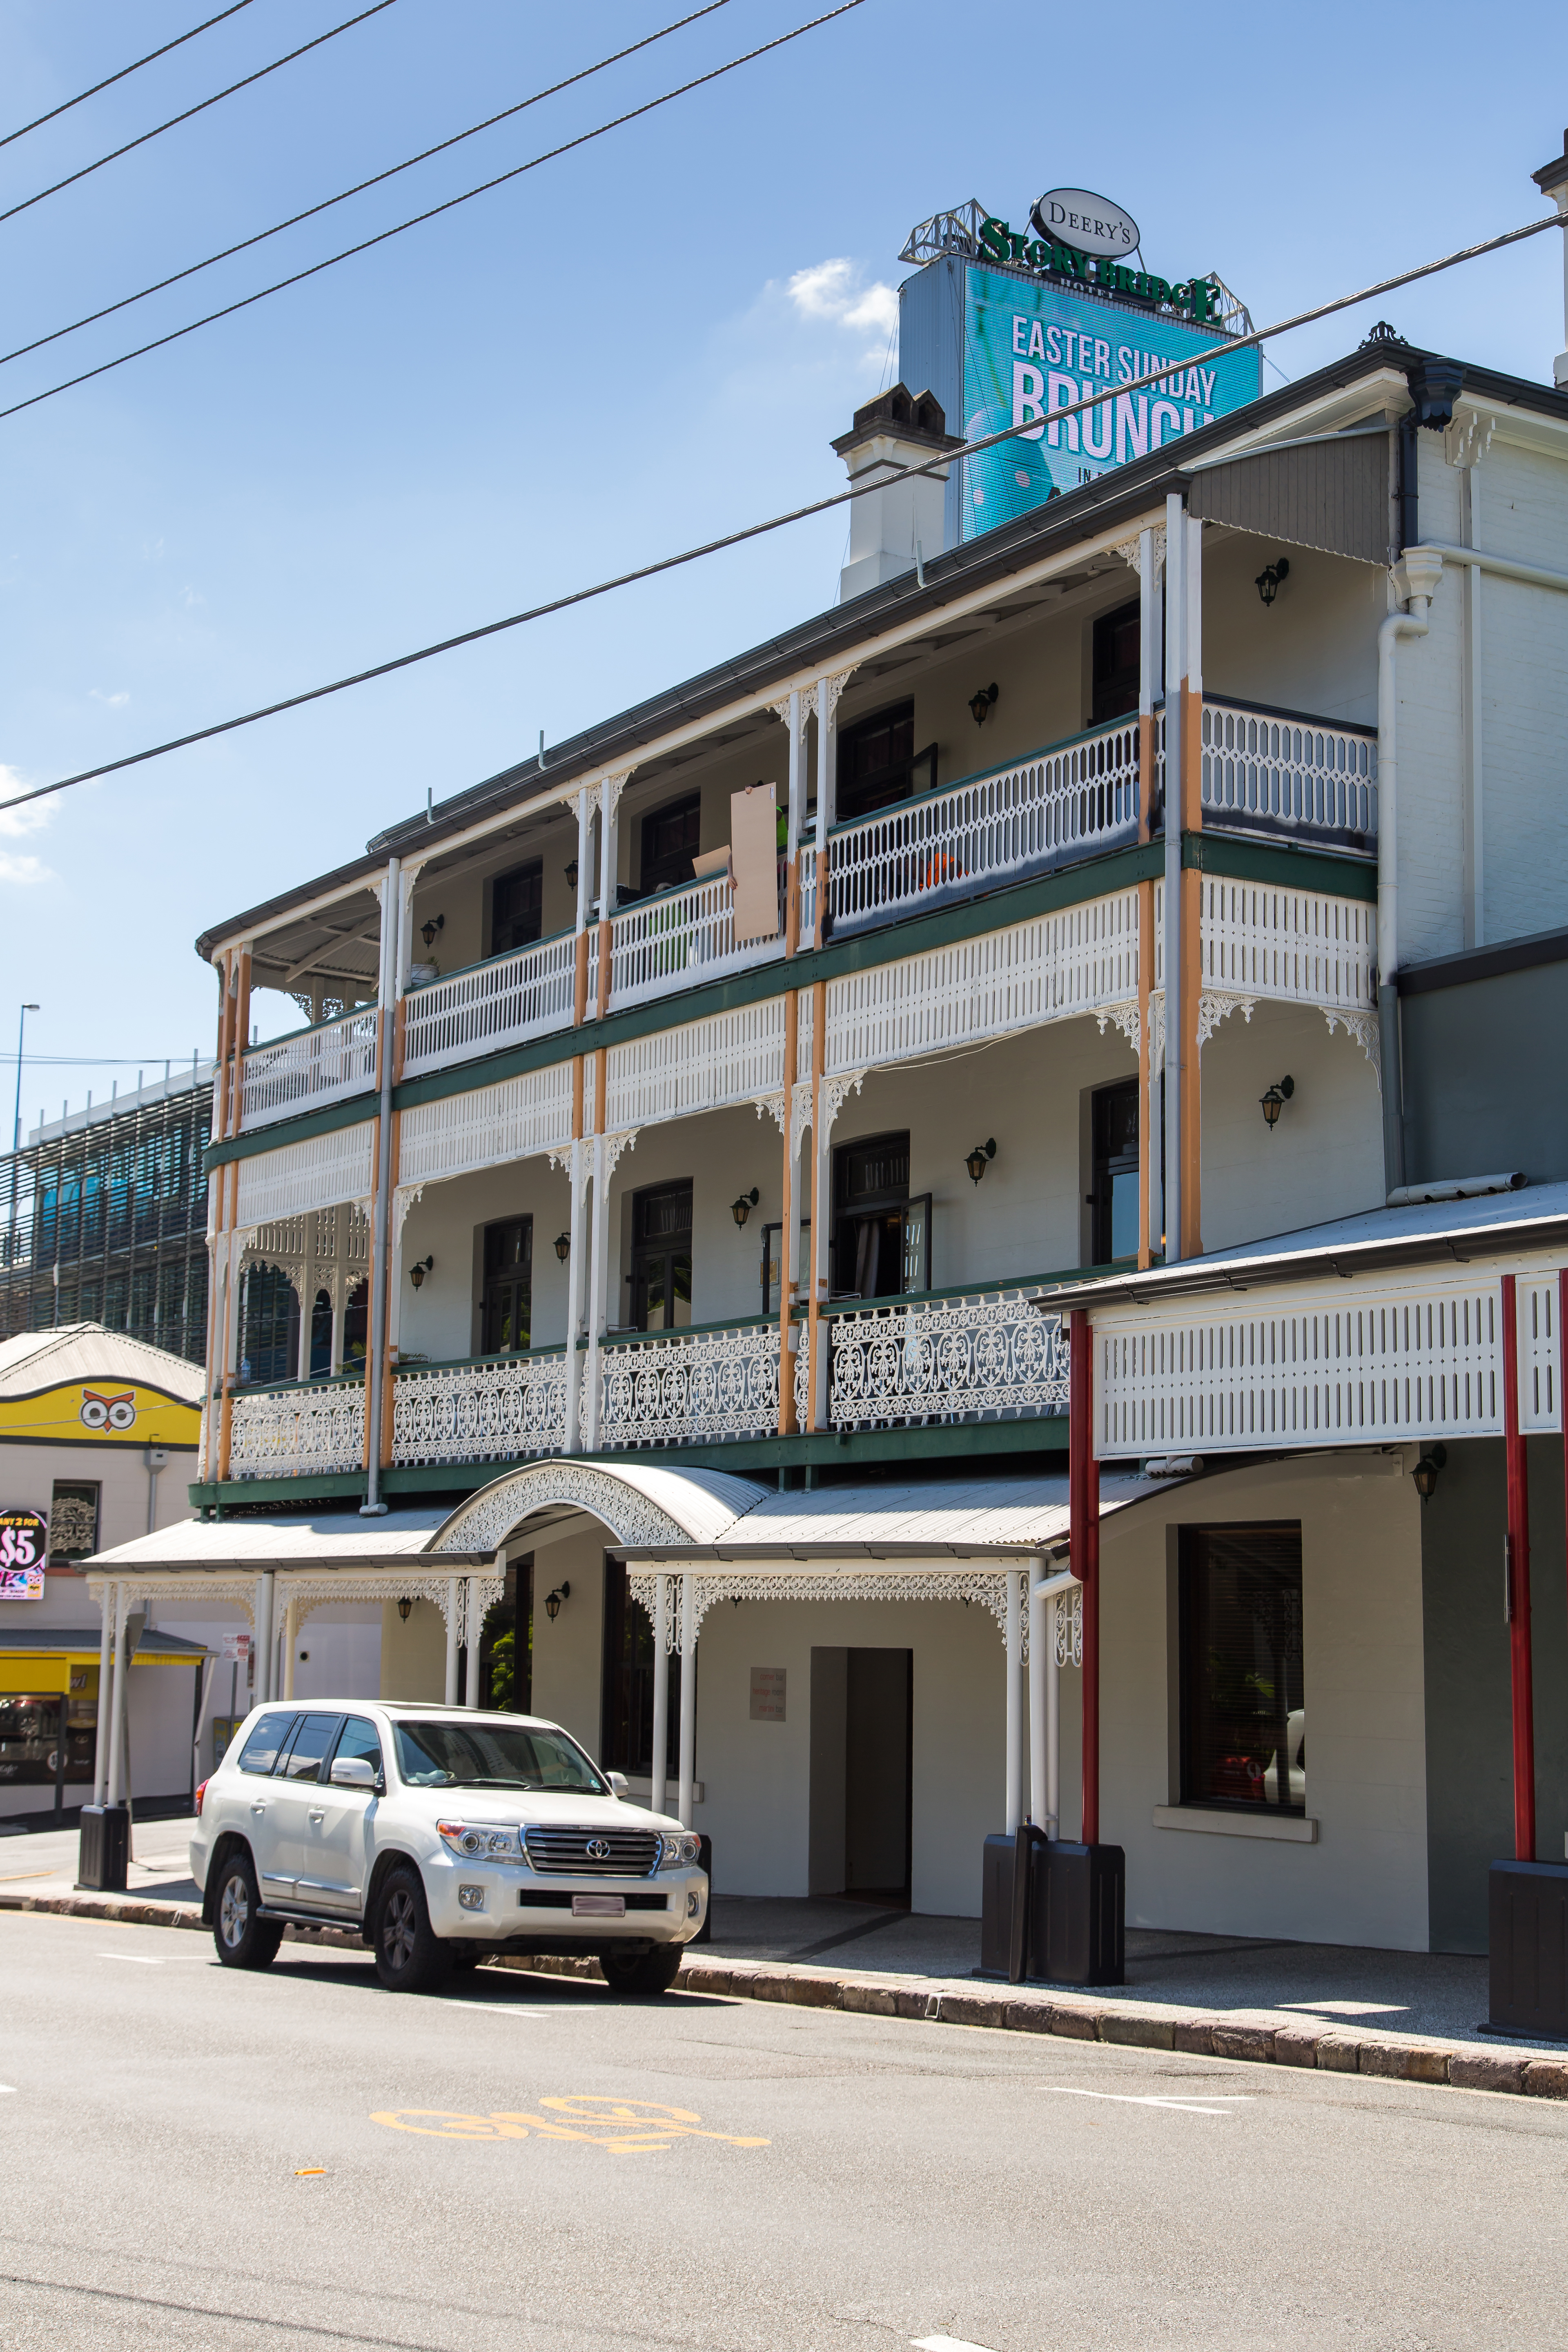 This is an image of the Story Bridge Hotel, taken from the Main Street elevation, looking north-east.